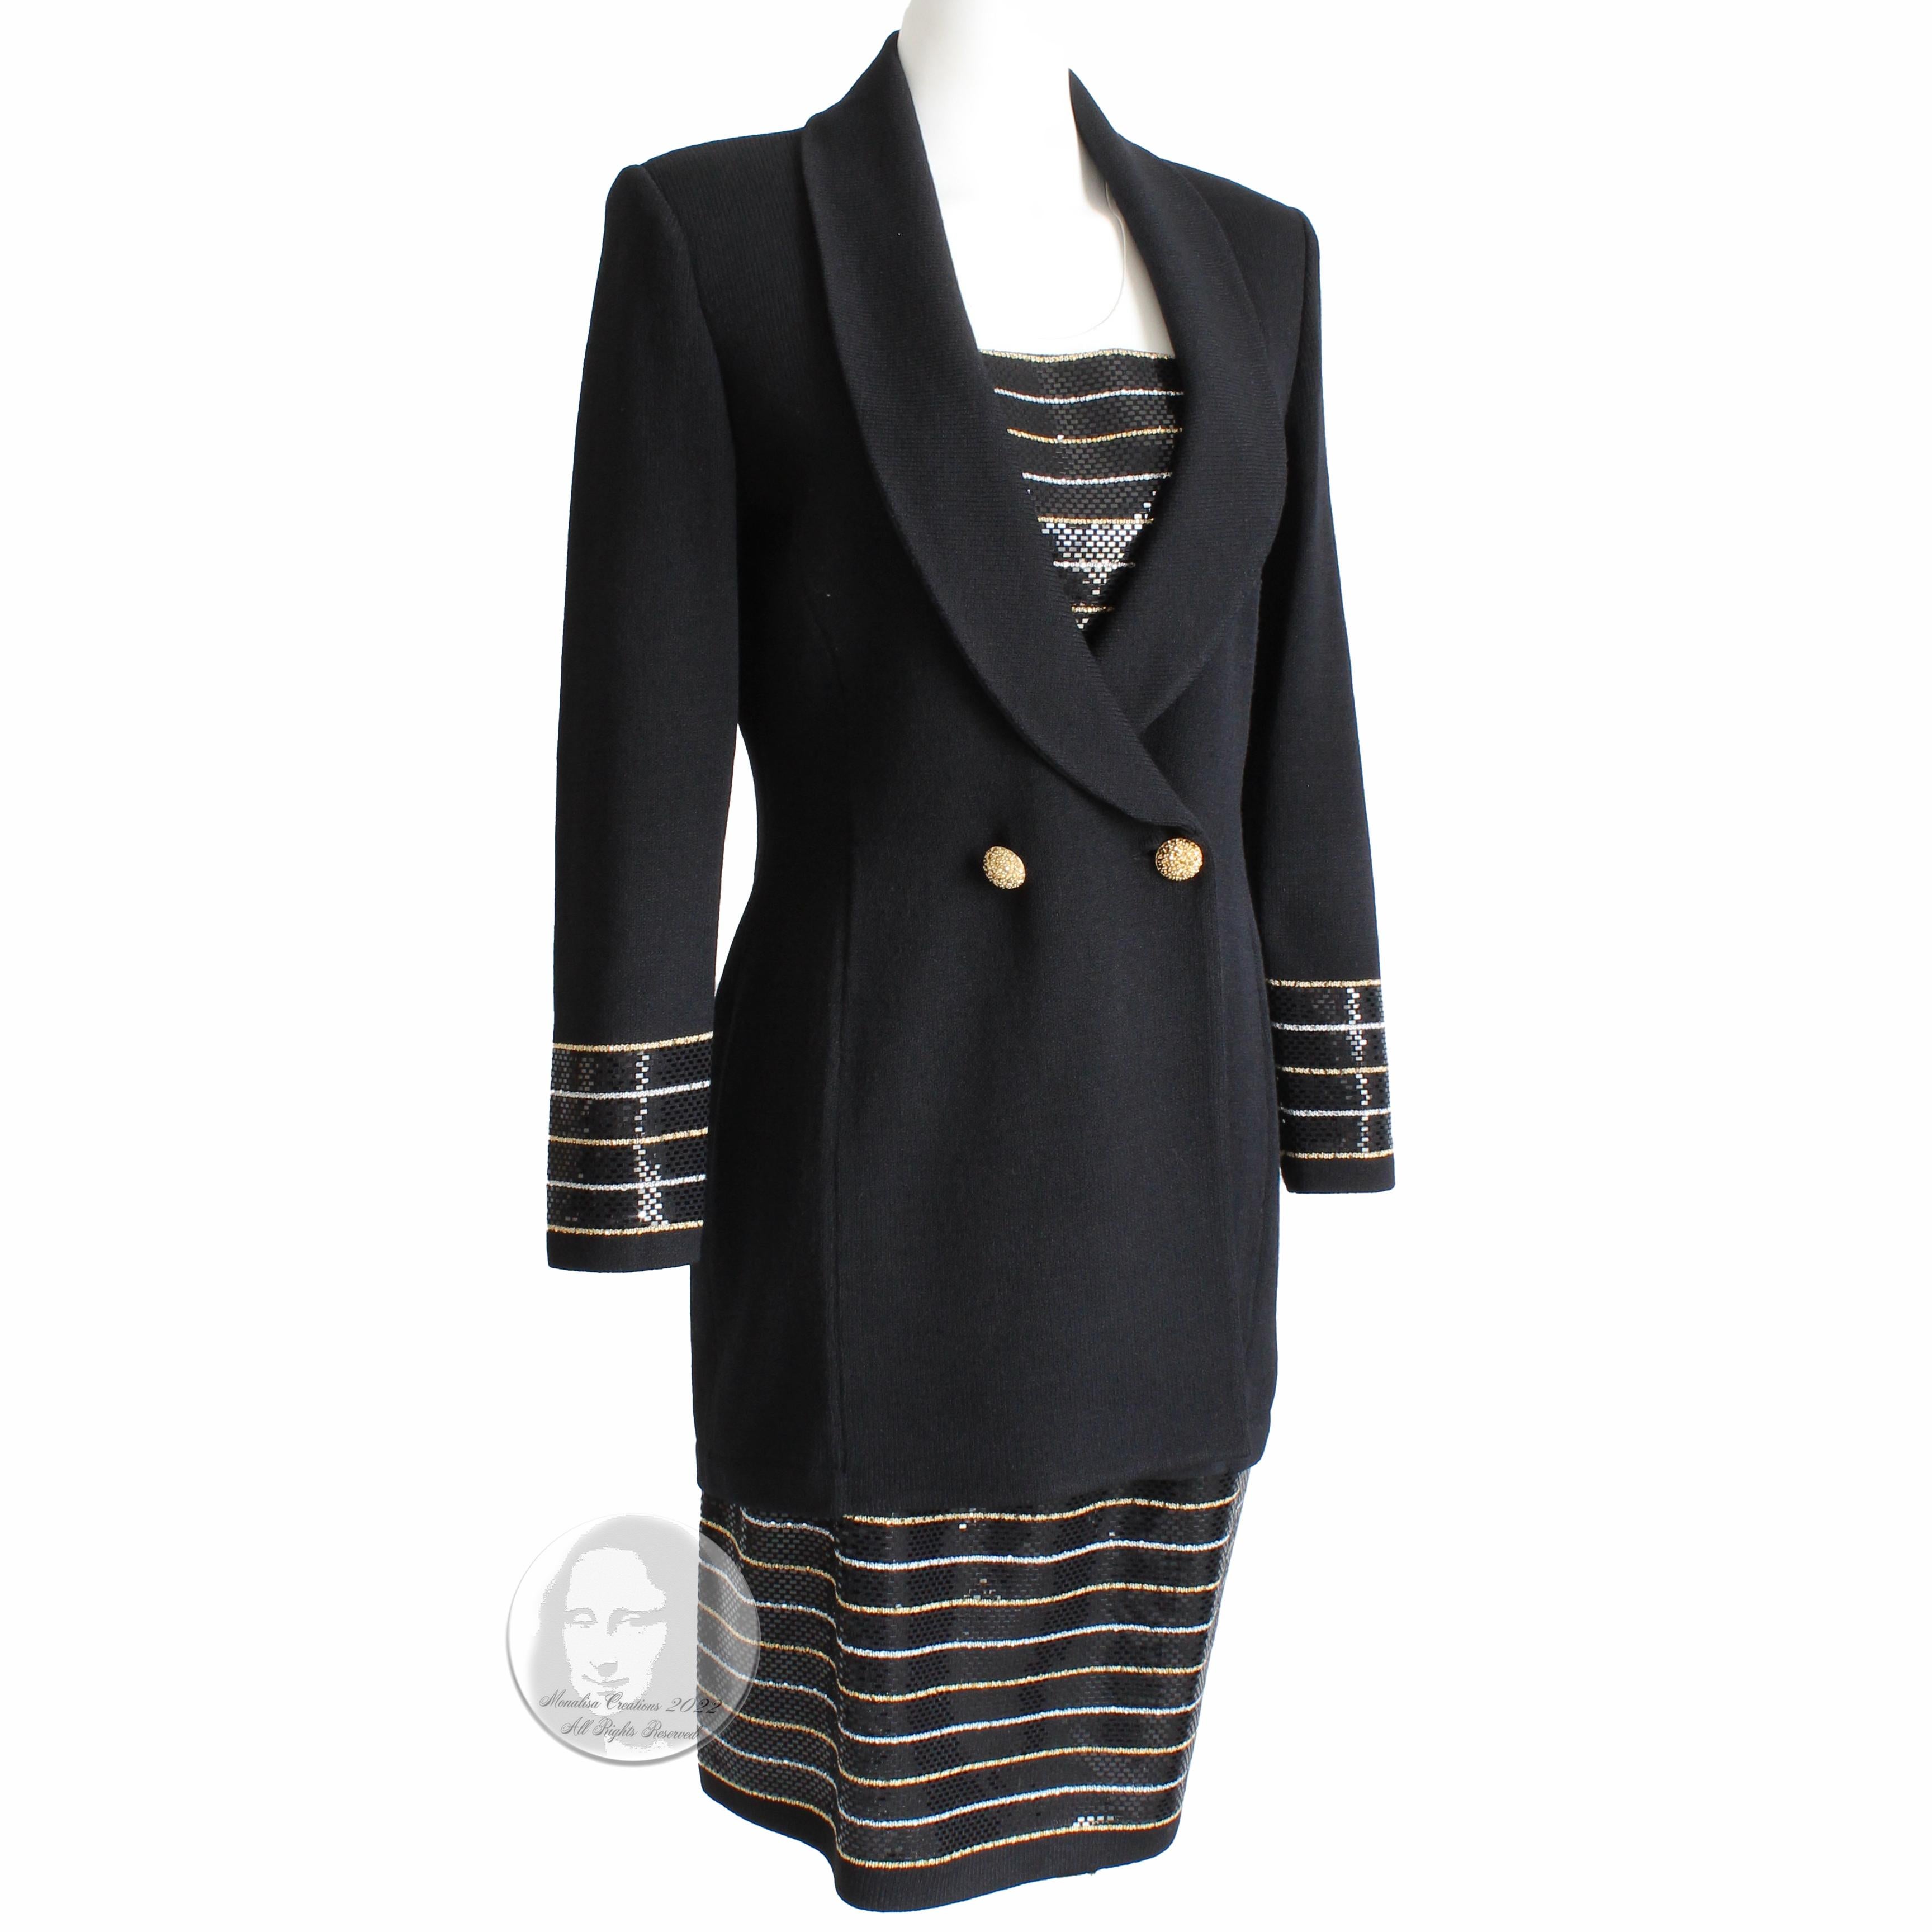 Authentic, preowned, vintage St John Evening suit, 2pc Jacket and Skirt, likely made in the 90s. Made from black Santana knit, the jacket has a chic shawl collar and is embellished at the sleeve cuffs. It features a snap-in (and removable)